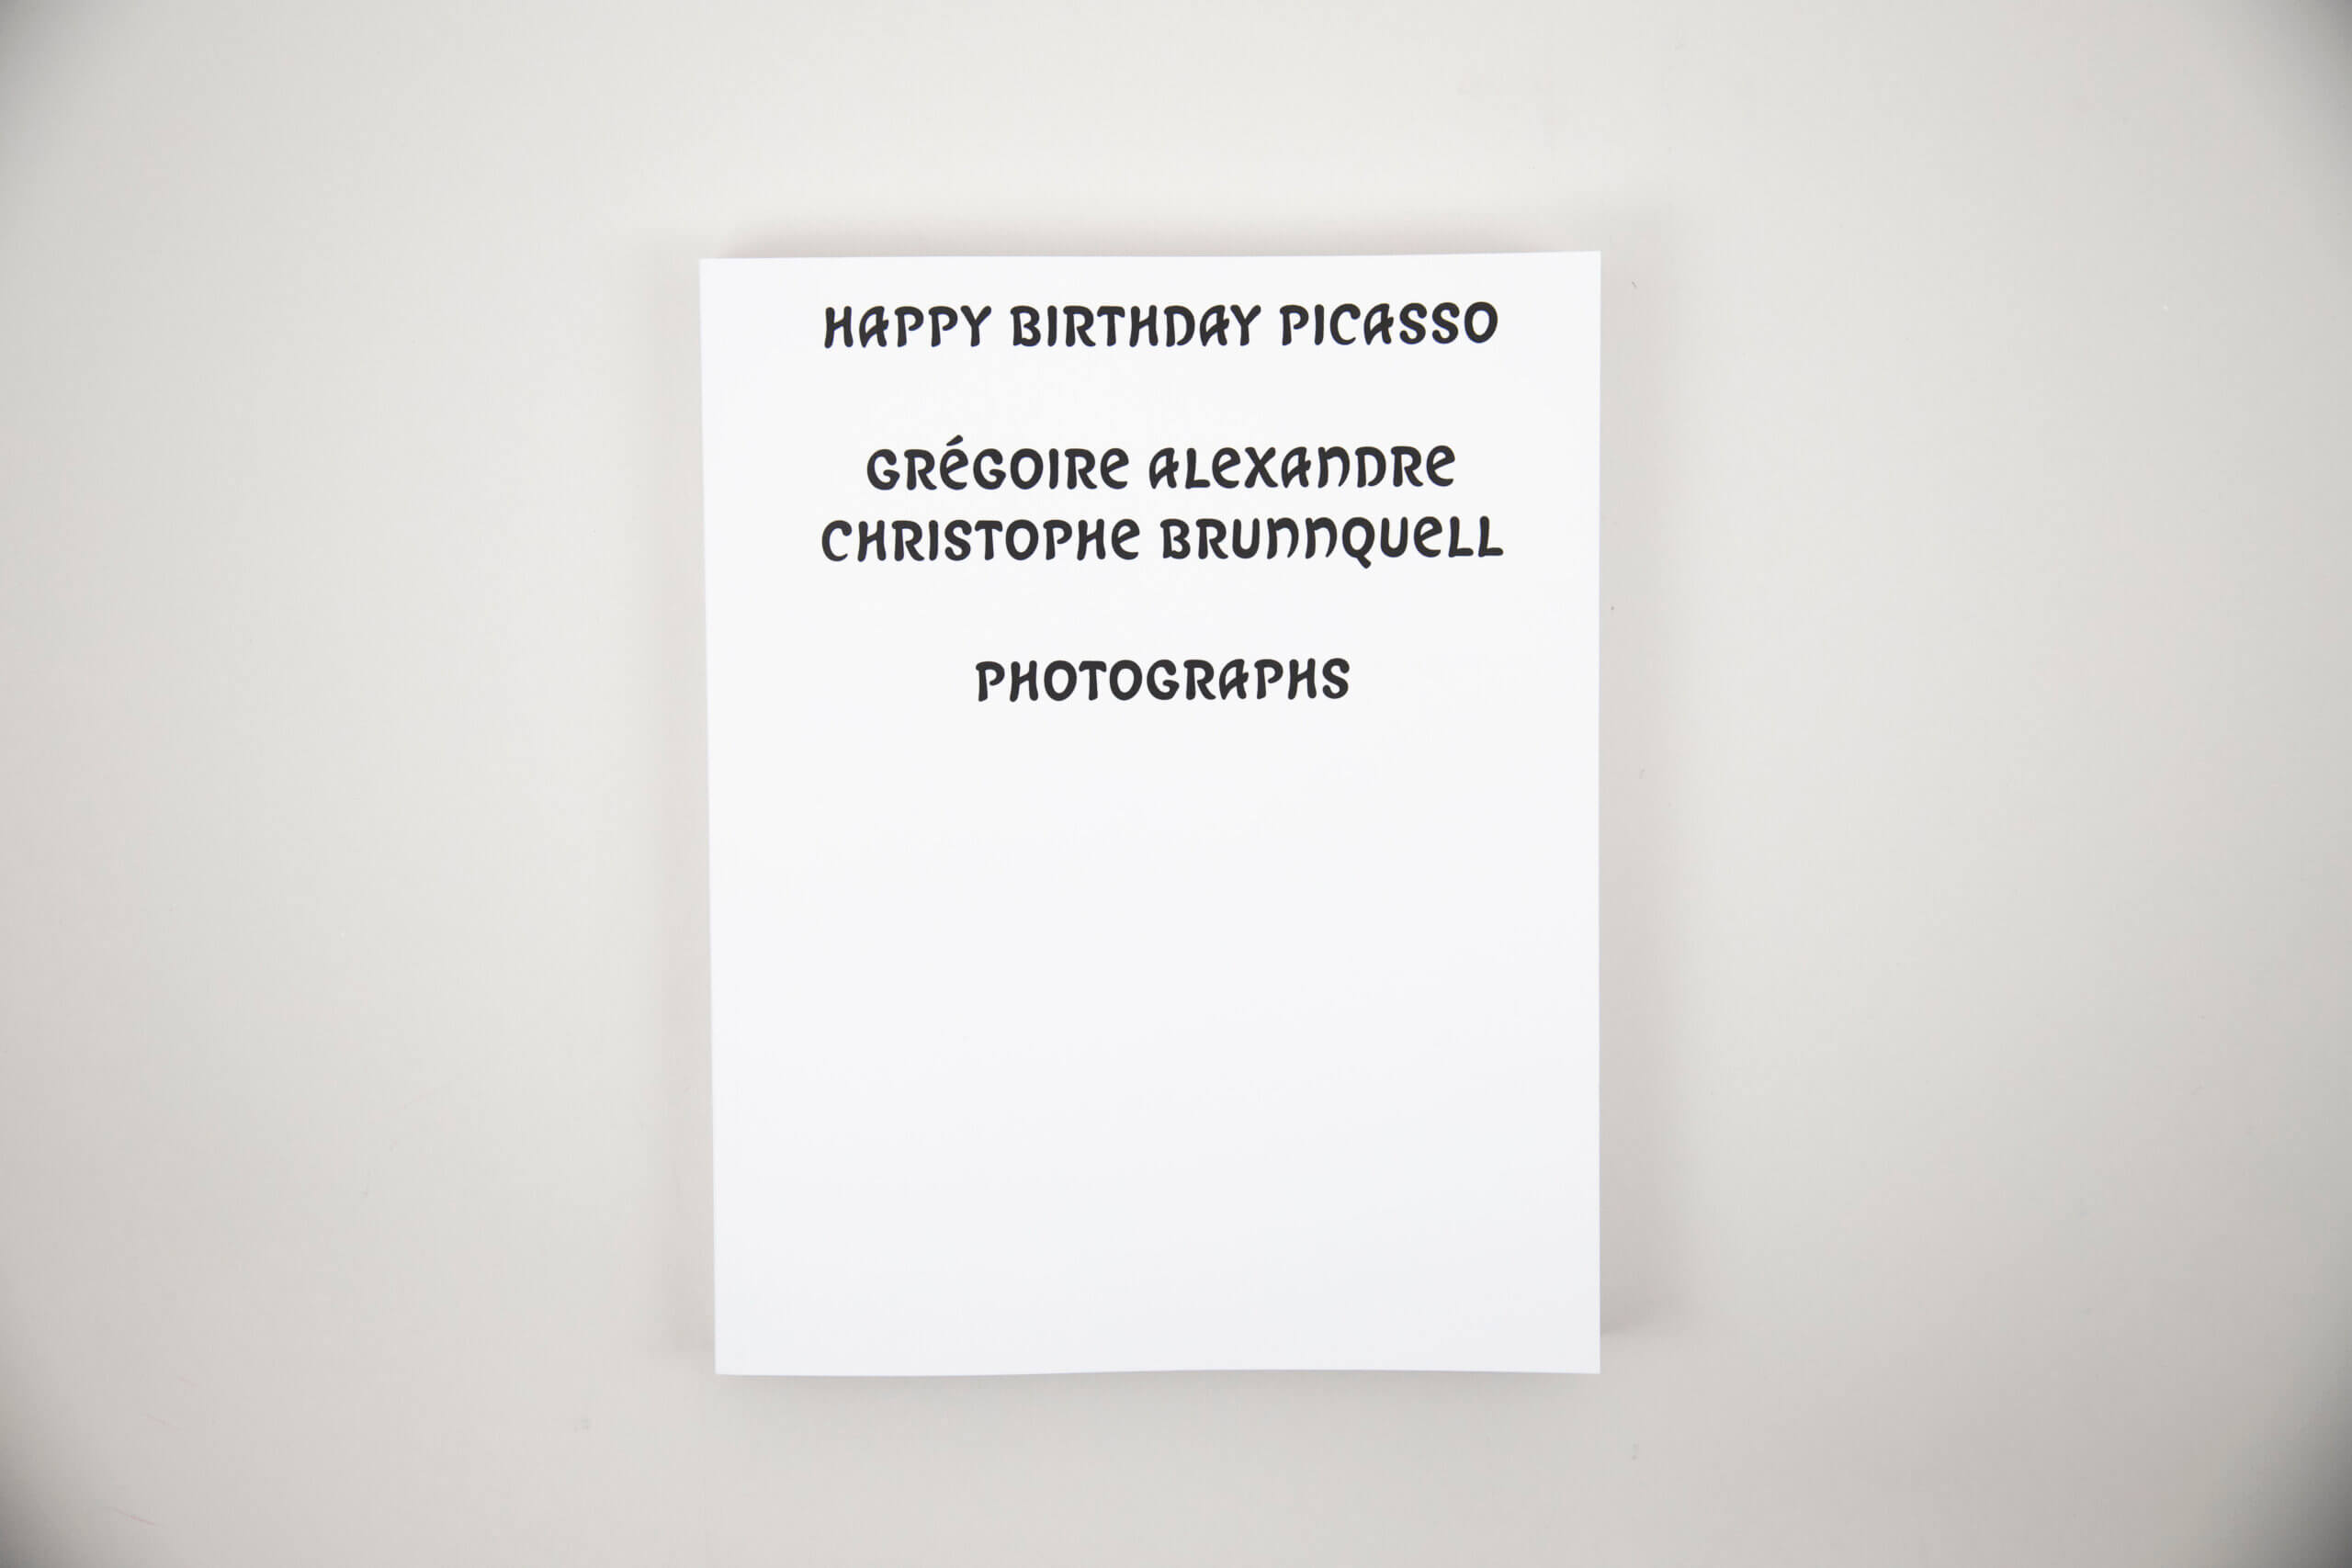 happy-birthday-picasso-alexandre-brunnquell-cover